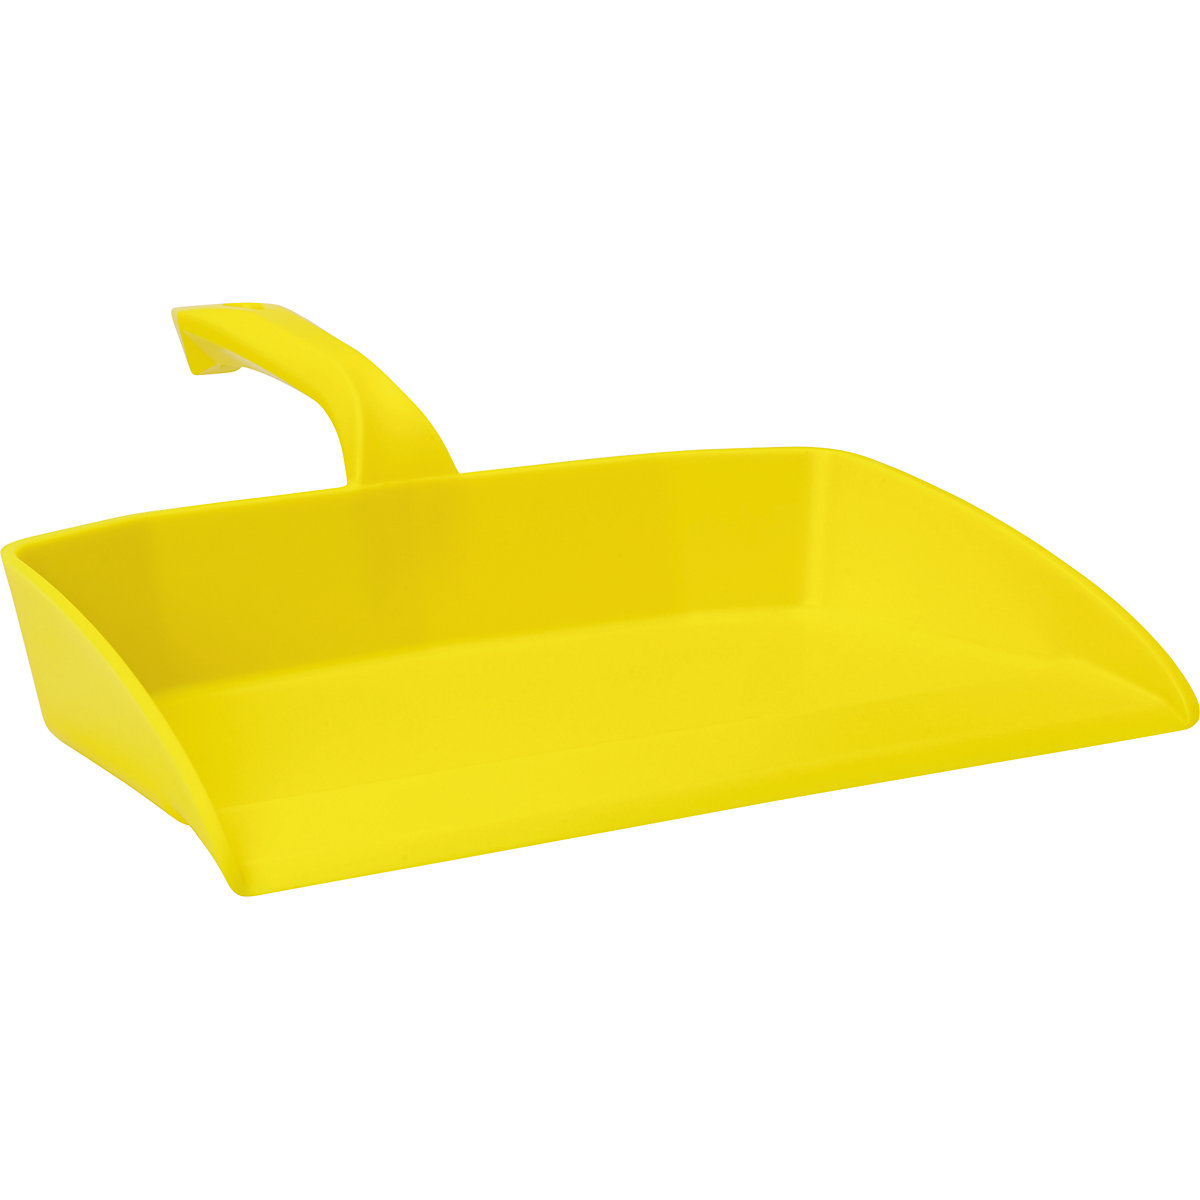 Dustpan – Vikan, overall length 330 mm, pack of 10, yellow